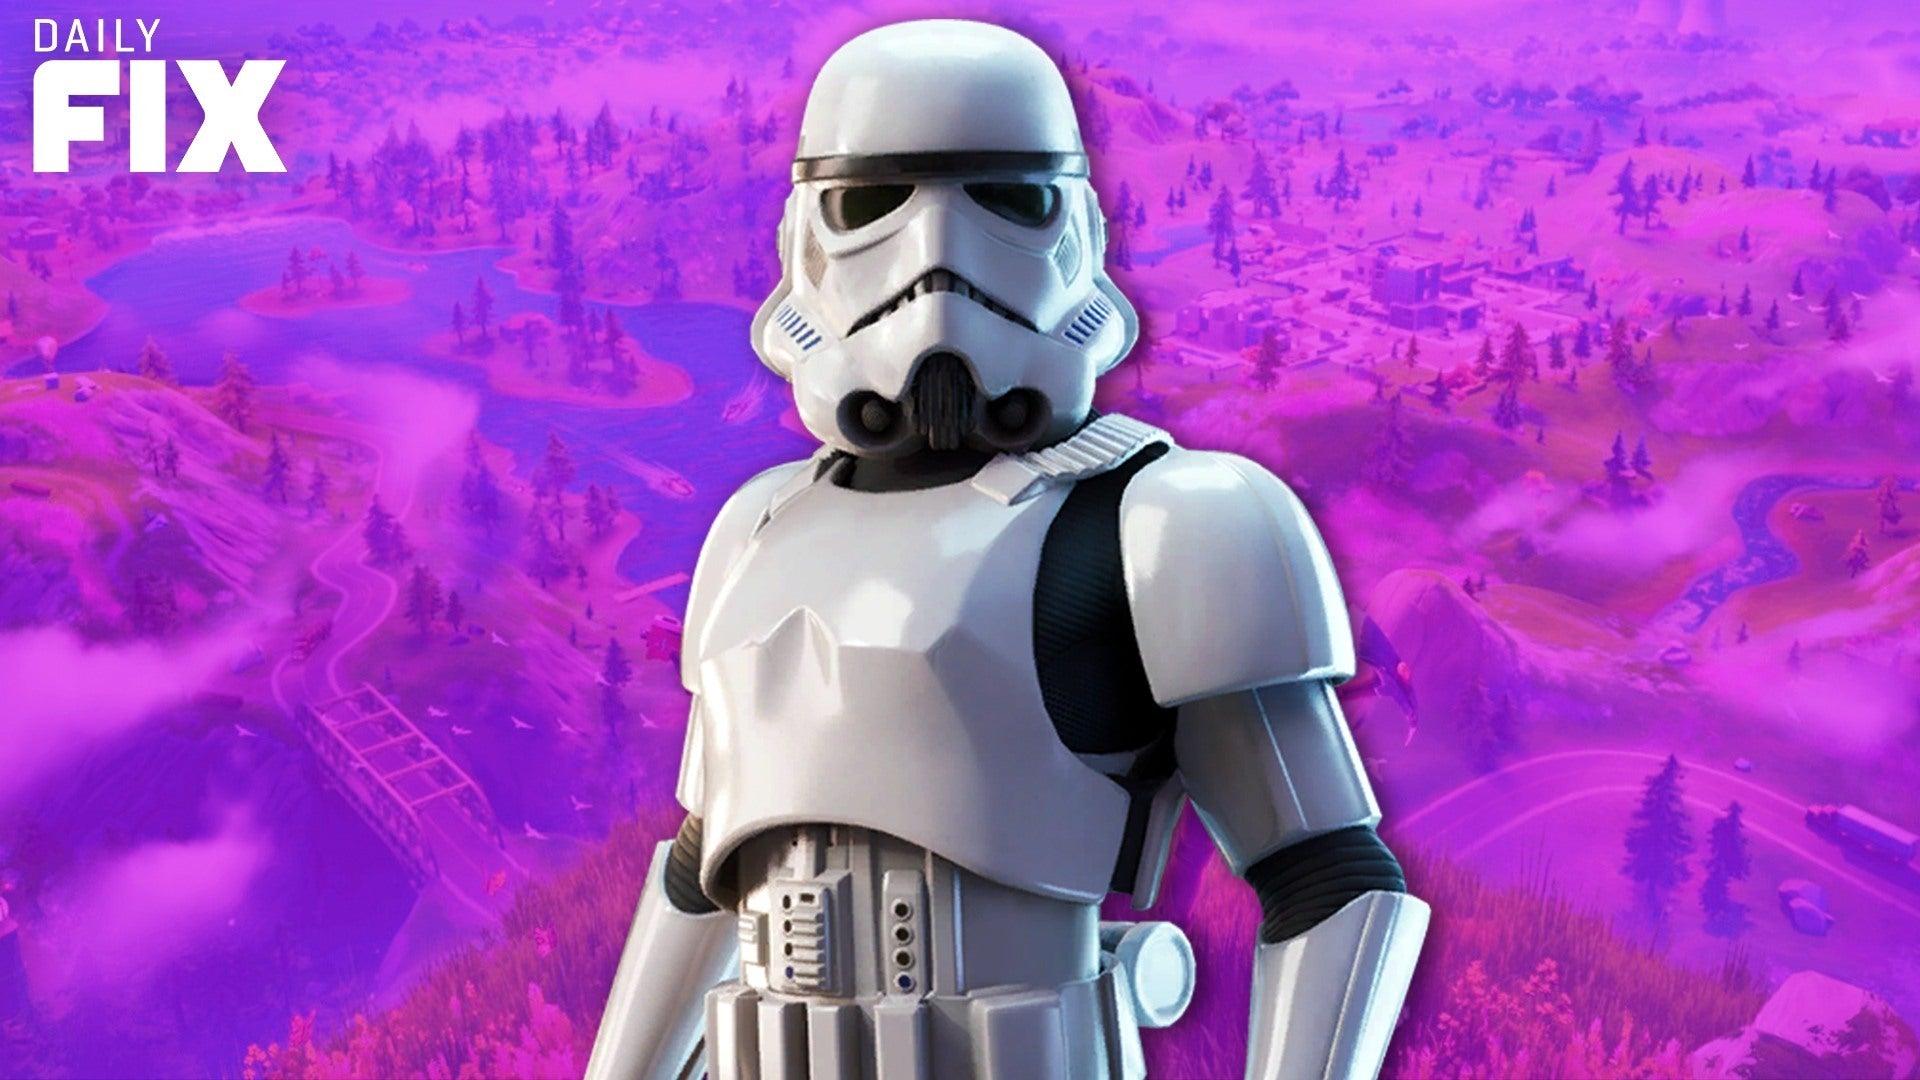 Fortnite x Star Wars: Stormtrooper Skin Now Available Daily Fix